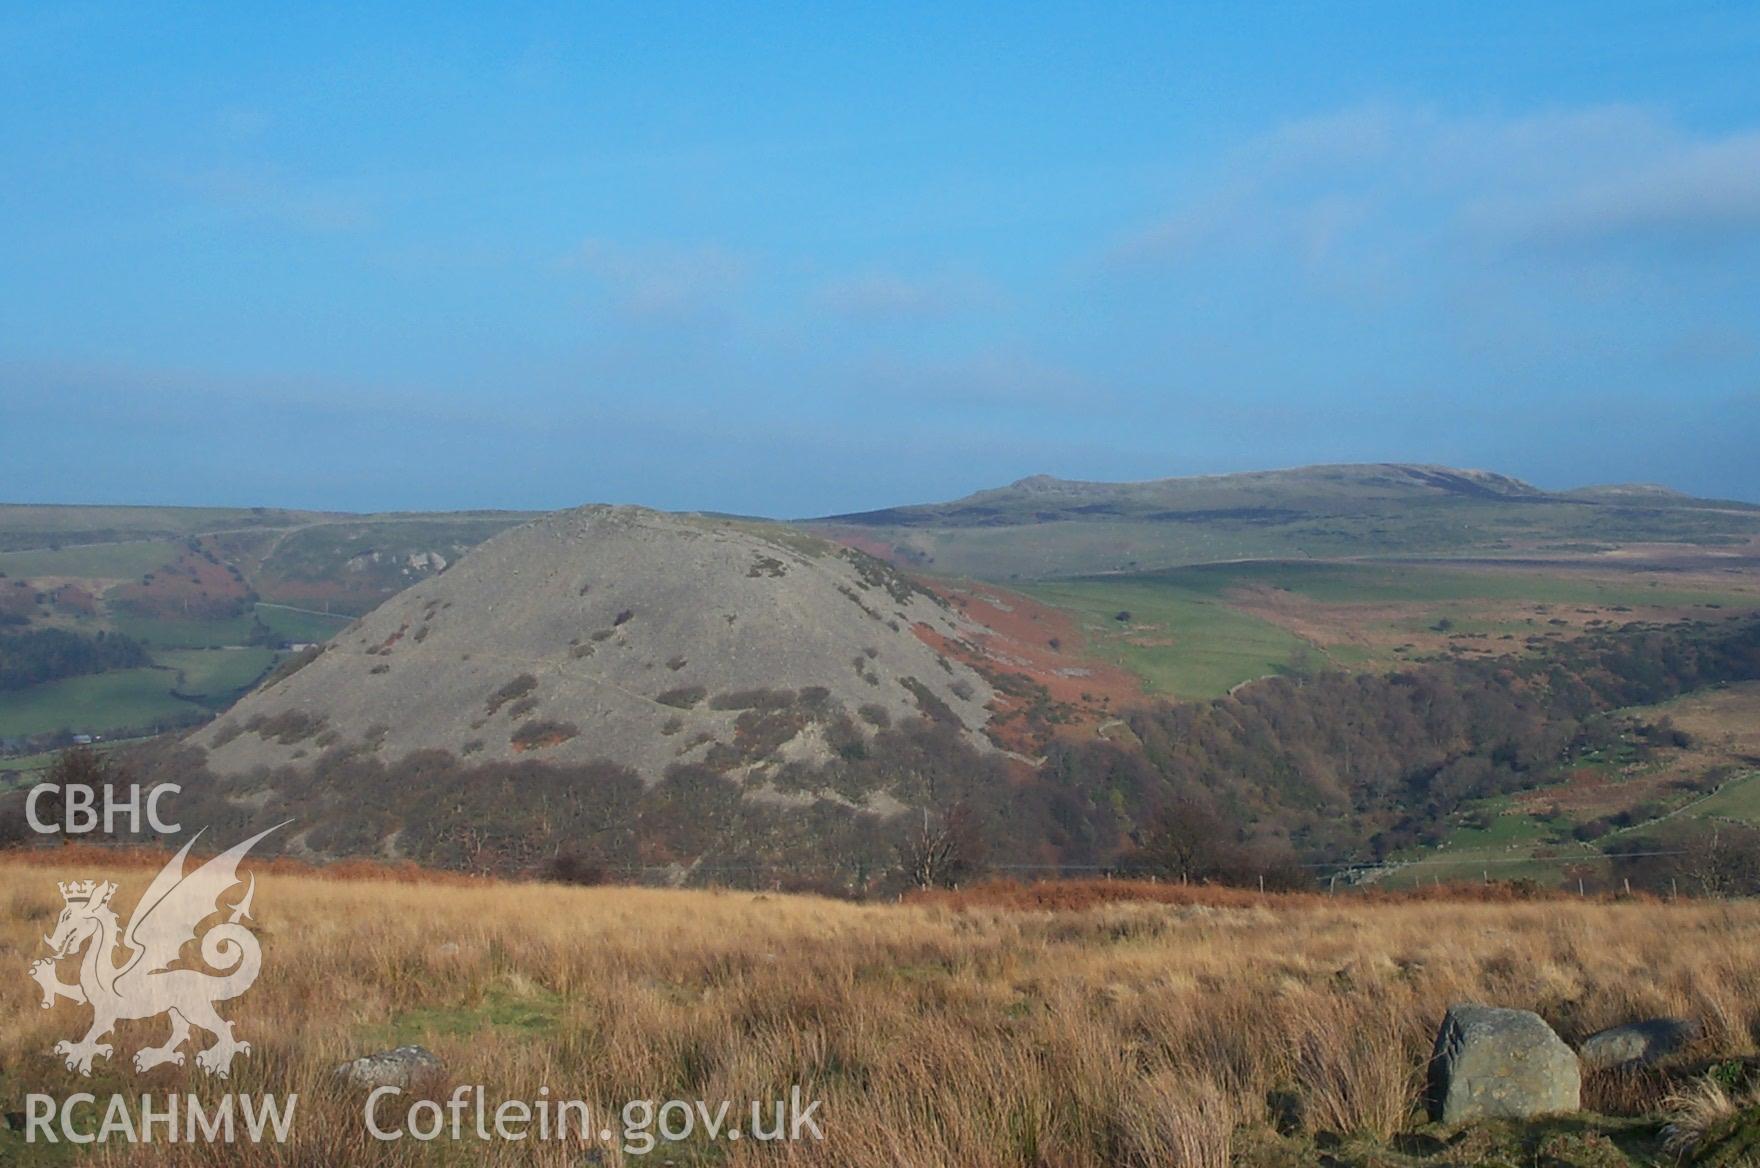 Digital photograph of Dinas Llanfairfechan from the North-east. Taken by P. Schofield on 17/02/2004 during the Eastern Snowdonia (North) Upland Survey.